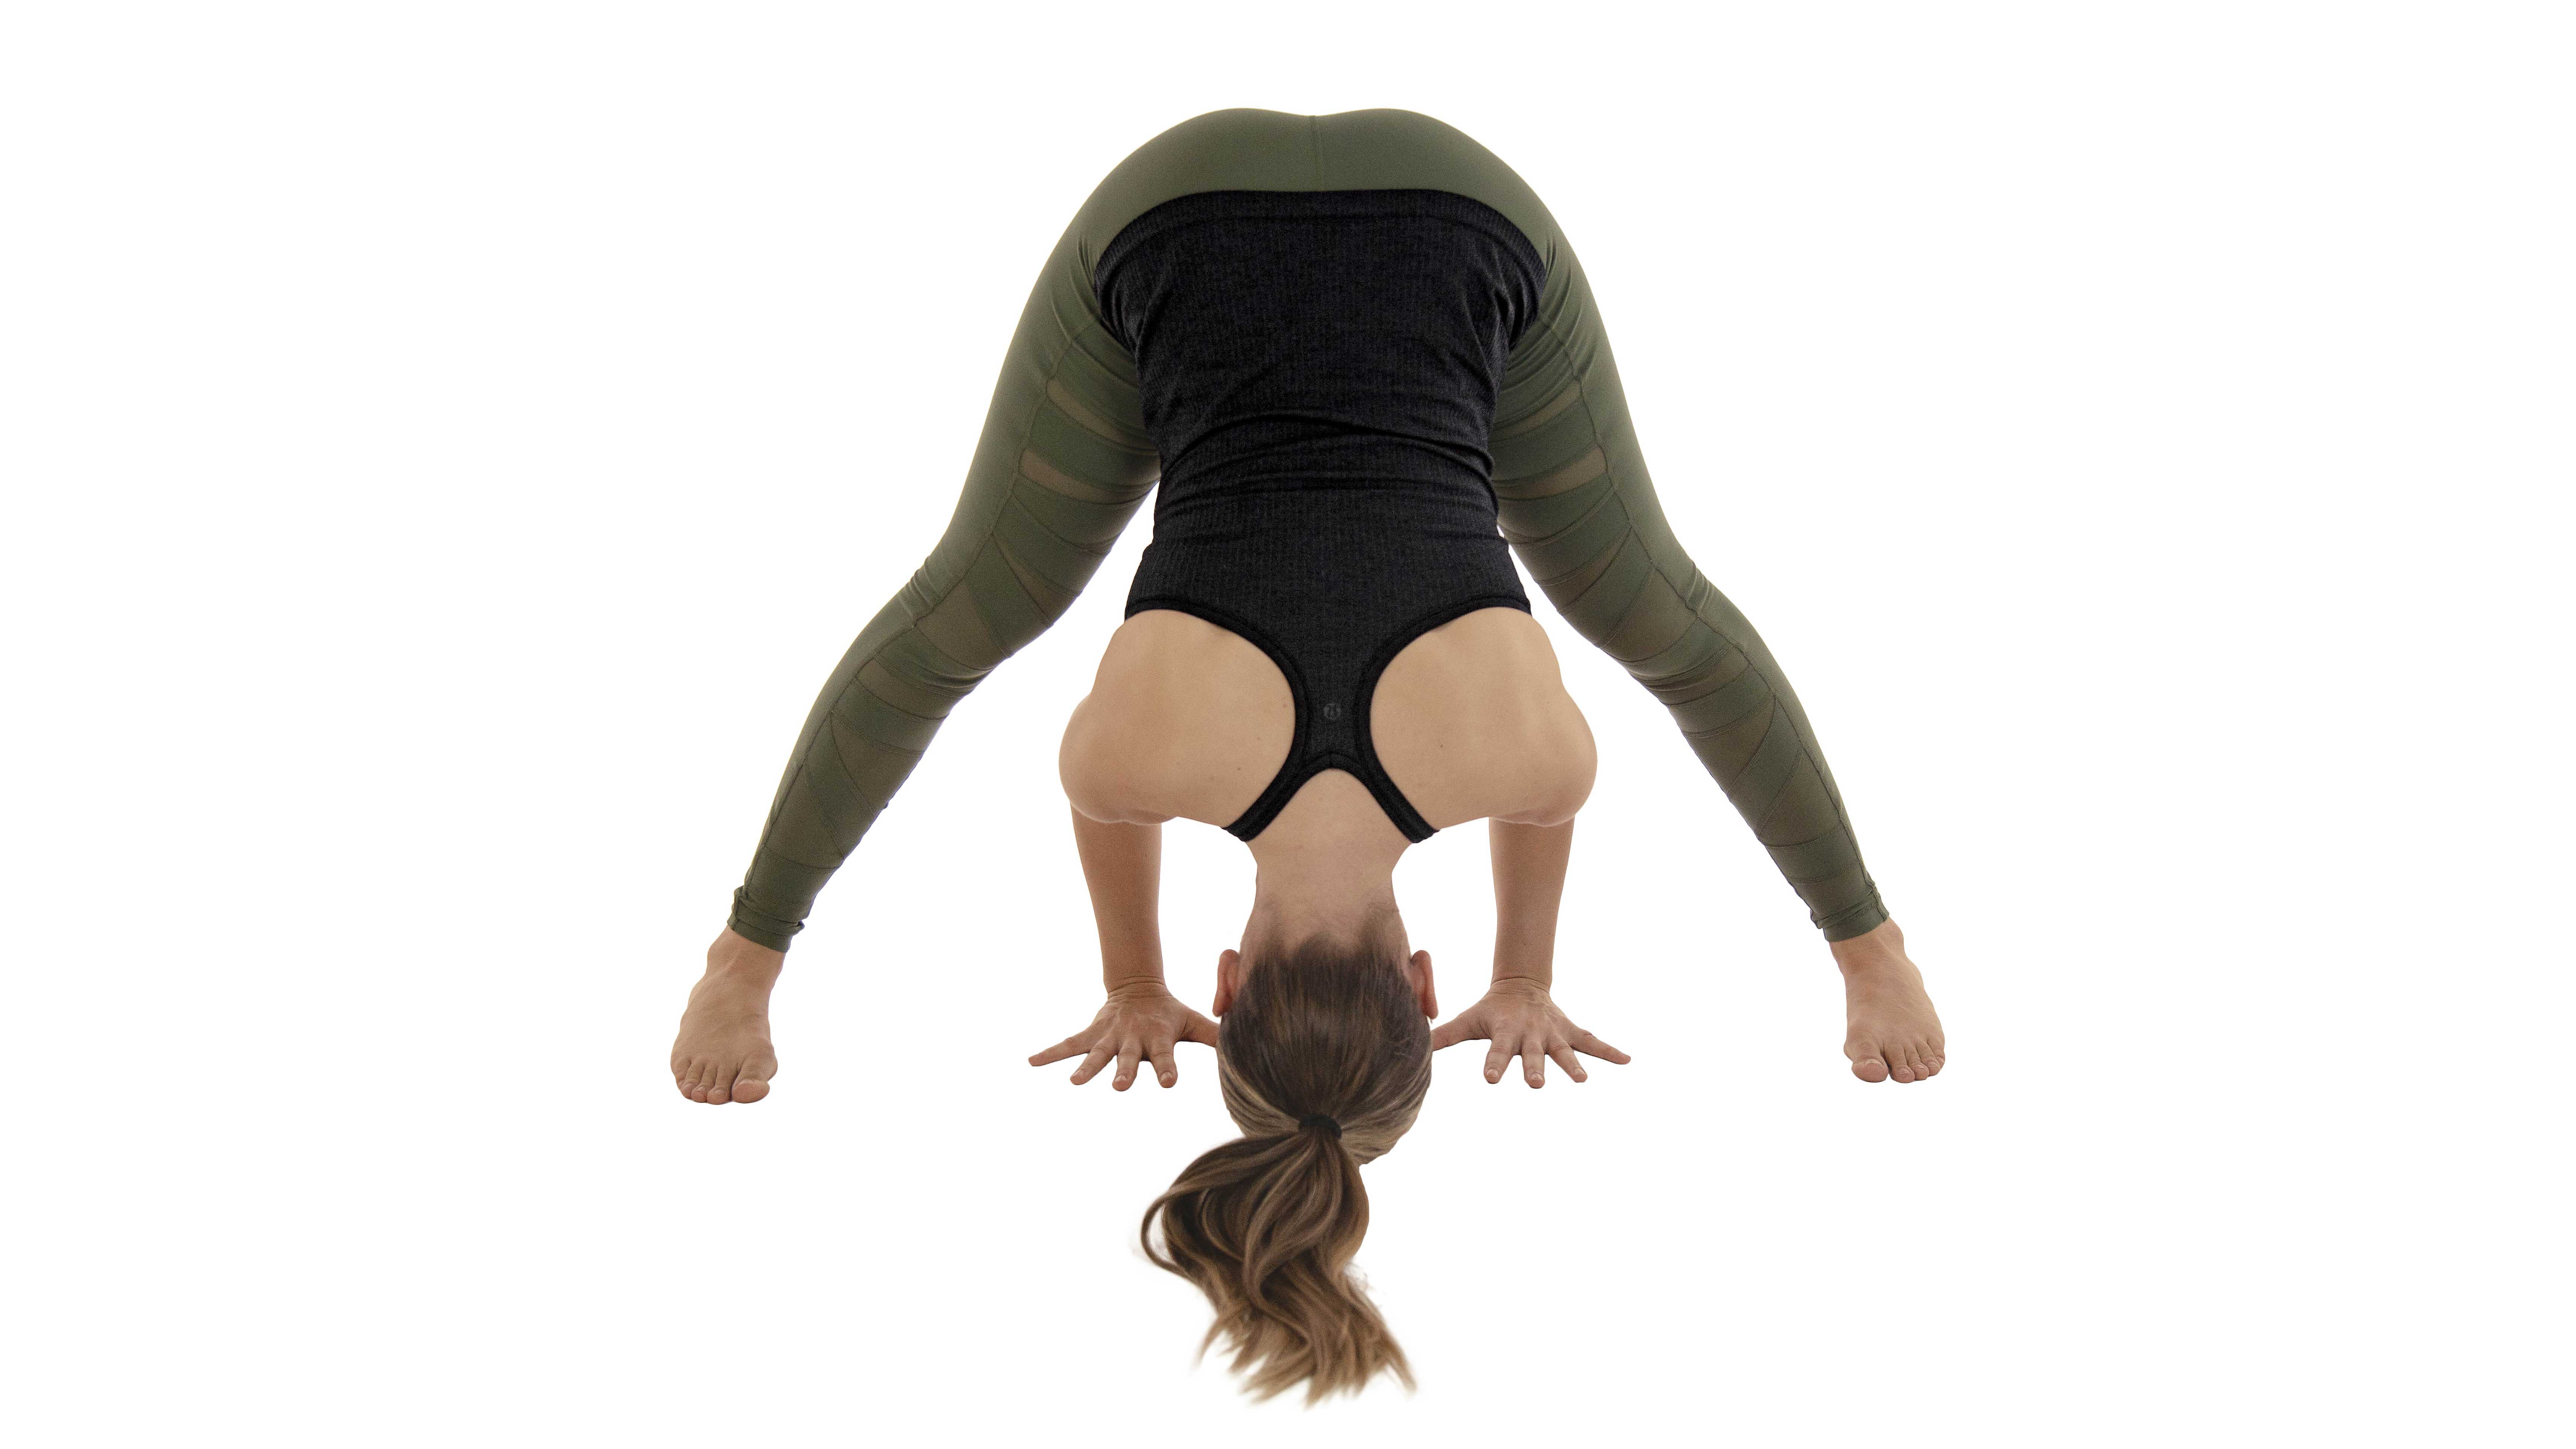 Micropractice: 5 Minutes Upside Down | DoYogaWithMe